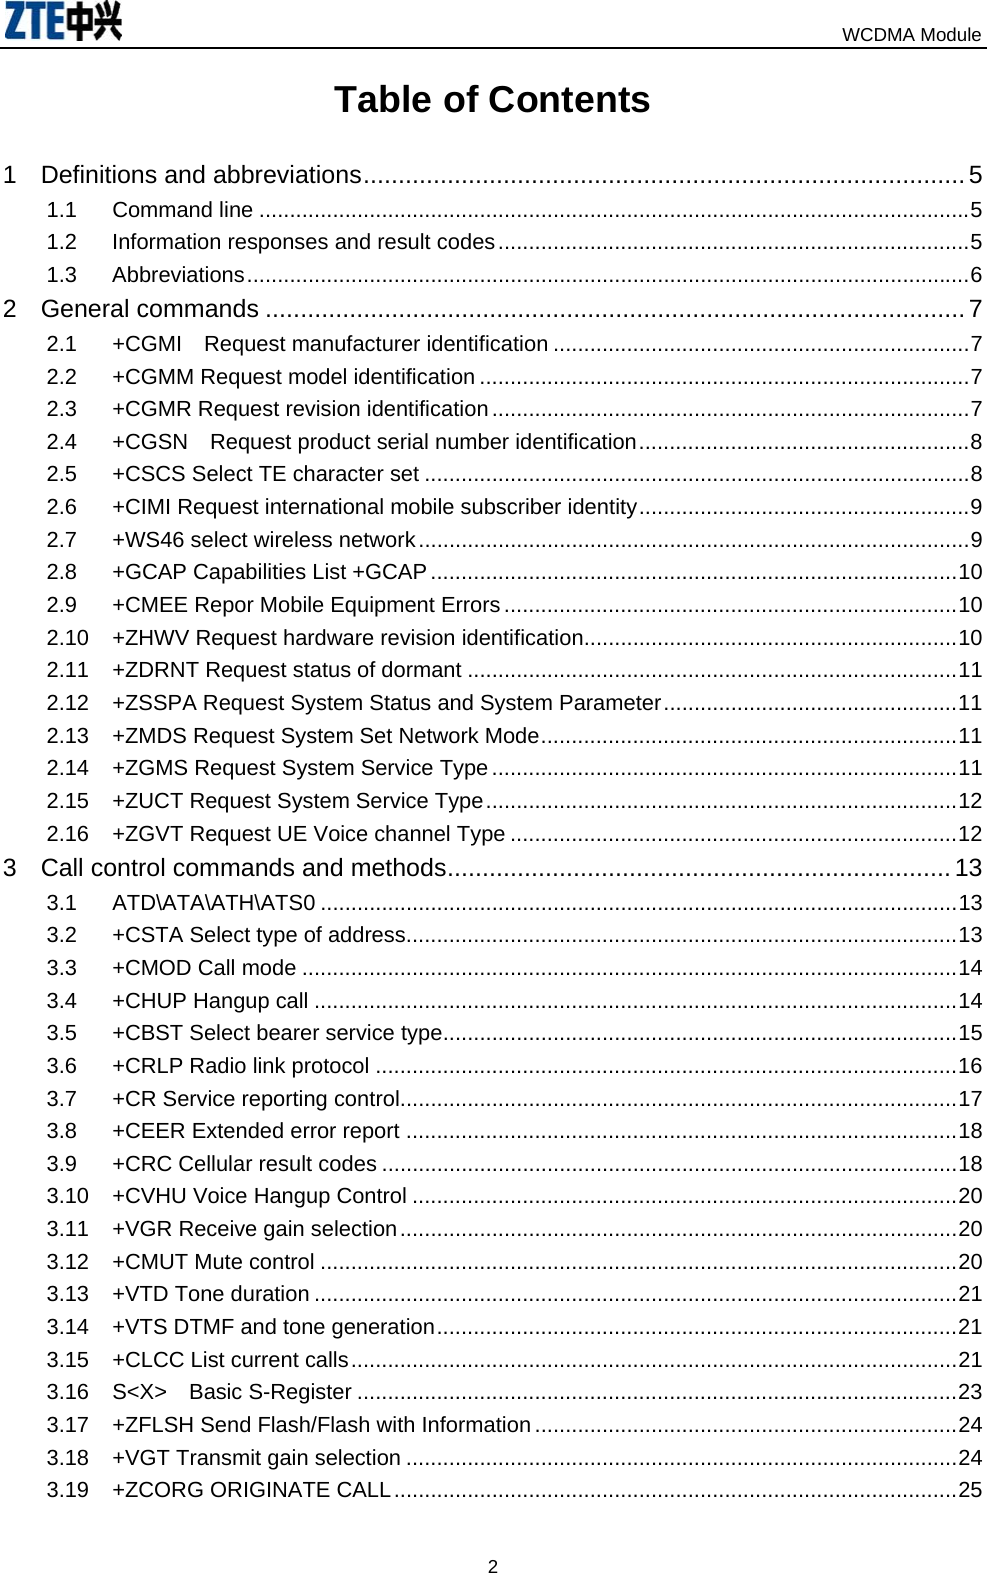                                                                            WCDMA Module  2Table of Contents   1 Definitions and abbreviations......................................................................................5 1.1 Command line ....................................................................................................................5 1.2 Information responses and result codes.............................................................................5 1.3 Abbreviations......................................................................................................................6 2 General commands ....................................................................................................7 2.1 +CGMI  Request manufacturer identification ....................................................................7 2.2 +CGMM Request model identification ................................................................................7 2.3 +CGMR Request revision identification..............................................................................7 2.4 +CGSN  Request product serial number identification......................................................8 2.5 +CSCS Select TE character set .........................................................................................8 2.6 +CIMI Request international mobile subscriber identity......................................................9 2.7 +WS46 select wireless network..........................................................................................9 2.8 +GCAP Capabilities List +GCAP......................................................................................10 2.9 +CMEE Repor Mobile Equipment Errors..........................................................................10 2.10 +ZHWV Request hardware revision identification.............................................................10 2.11 +ZDRNT Request status of dormant ................................................................................11 2.12 +ZSSPA Request System Status and System Parameter................................................11 2.13 +ZMDS Request System Set Network Mode....................................................................11 2.14 +ZGMS Request System Service Type ............................................................................11 2.15 +ZUCT Request System Service Type.............................................................................12 2.16 +ZGVT Request UE Voice channel Type .........................................................................12 3 Call control commands and methods........................................................................ 13 3.1 ATD\ATA\ATH\ATS0 ........................................................................................................13 3.2 +CSTA Select type of address..........................................................................................13 3.3 +CMOD Call mode ...........................................................................................................14 3.4 +CHUP Hangup call .........................................................................................................14 3.5 +CBST Select bearer service type....................................................................................15 3.6 +CRLP Radio link protocol ...............................................................................................16 3.7 +CR Service reporting control...........................................................................................17 3.8 +CEER Extended error report ..........................................................................................18 3.9 +CRC Cellular result codes ..............................................................................................18 3.10 +CVHU Voice Hangup Control .........................................................................................20 3.11 +VGR Receive gain selection...........................................................................................20 3.12 +CMUT Mute control ........................................................................................................20 3.13 +VTD Tone duration .........................................................................................................21 3.14 +VTS DTMF and tone generation.....................................................................................21 3.15 +CLCC List current calls...................................................................................................21 3.16 S&lt;X&gt;  Basic S-Register ..................................................................................................23 3.17 +ZFLSH Send Flash/Flash with Information .....................................................................24 3.18 +VGT Transmit gain selection ..........................................................................................24 3.19 +ZCORG ORIGINATE CALL............................................................................................25 